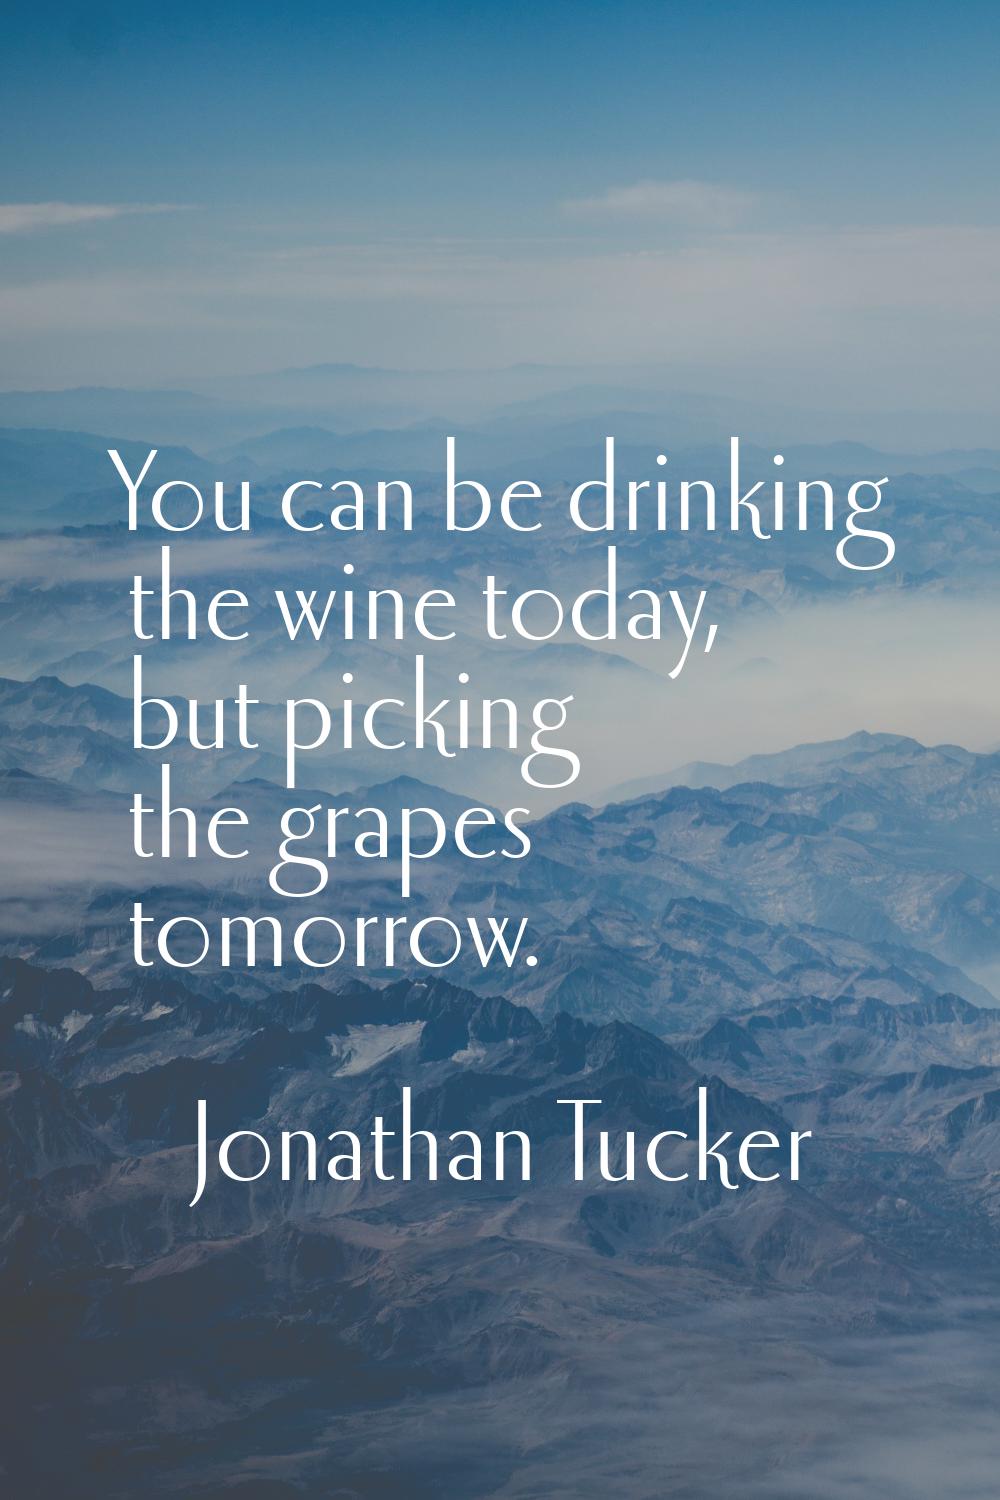 You can be drinking the wine today, but picking the grapes tomorrow.